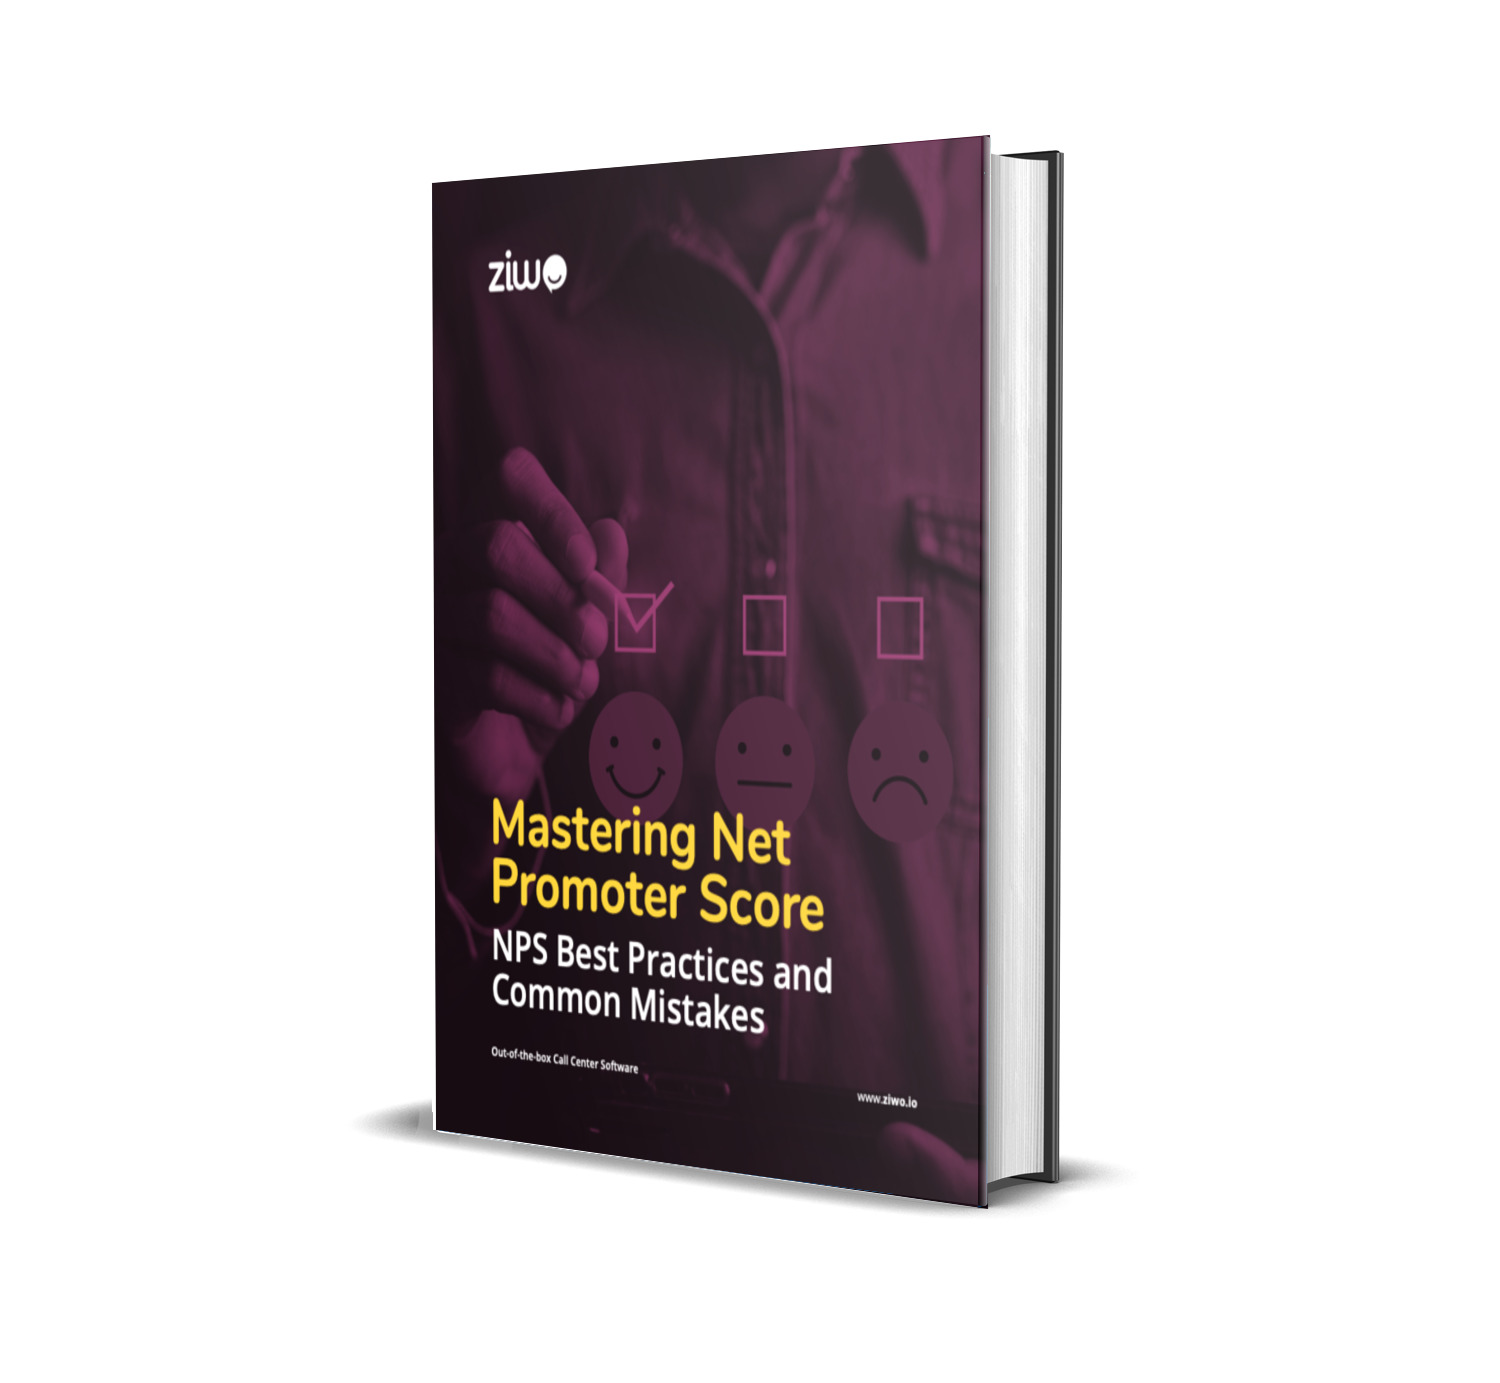 Mastering Net Promoter Score: A comprehensive guide to understanding and implementing NPS effectively